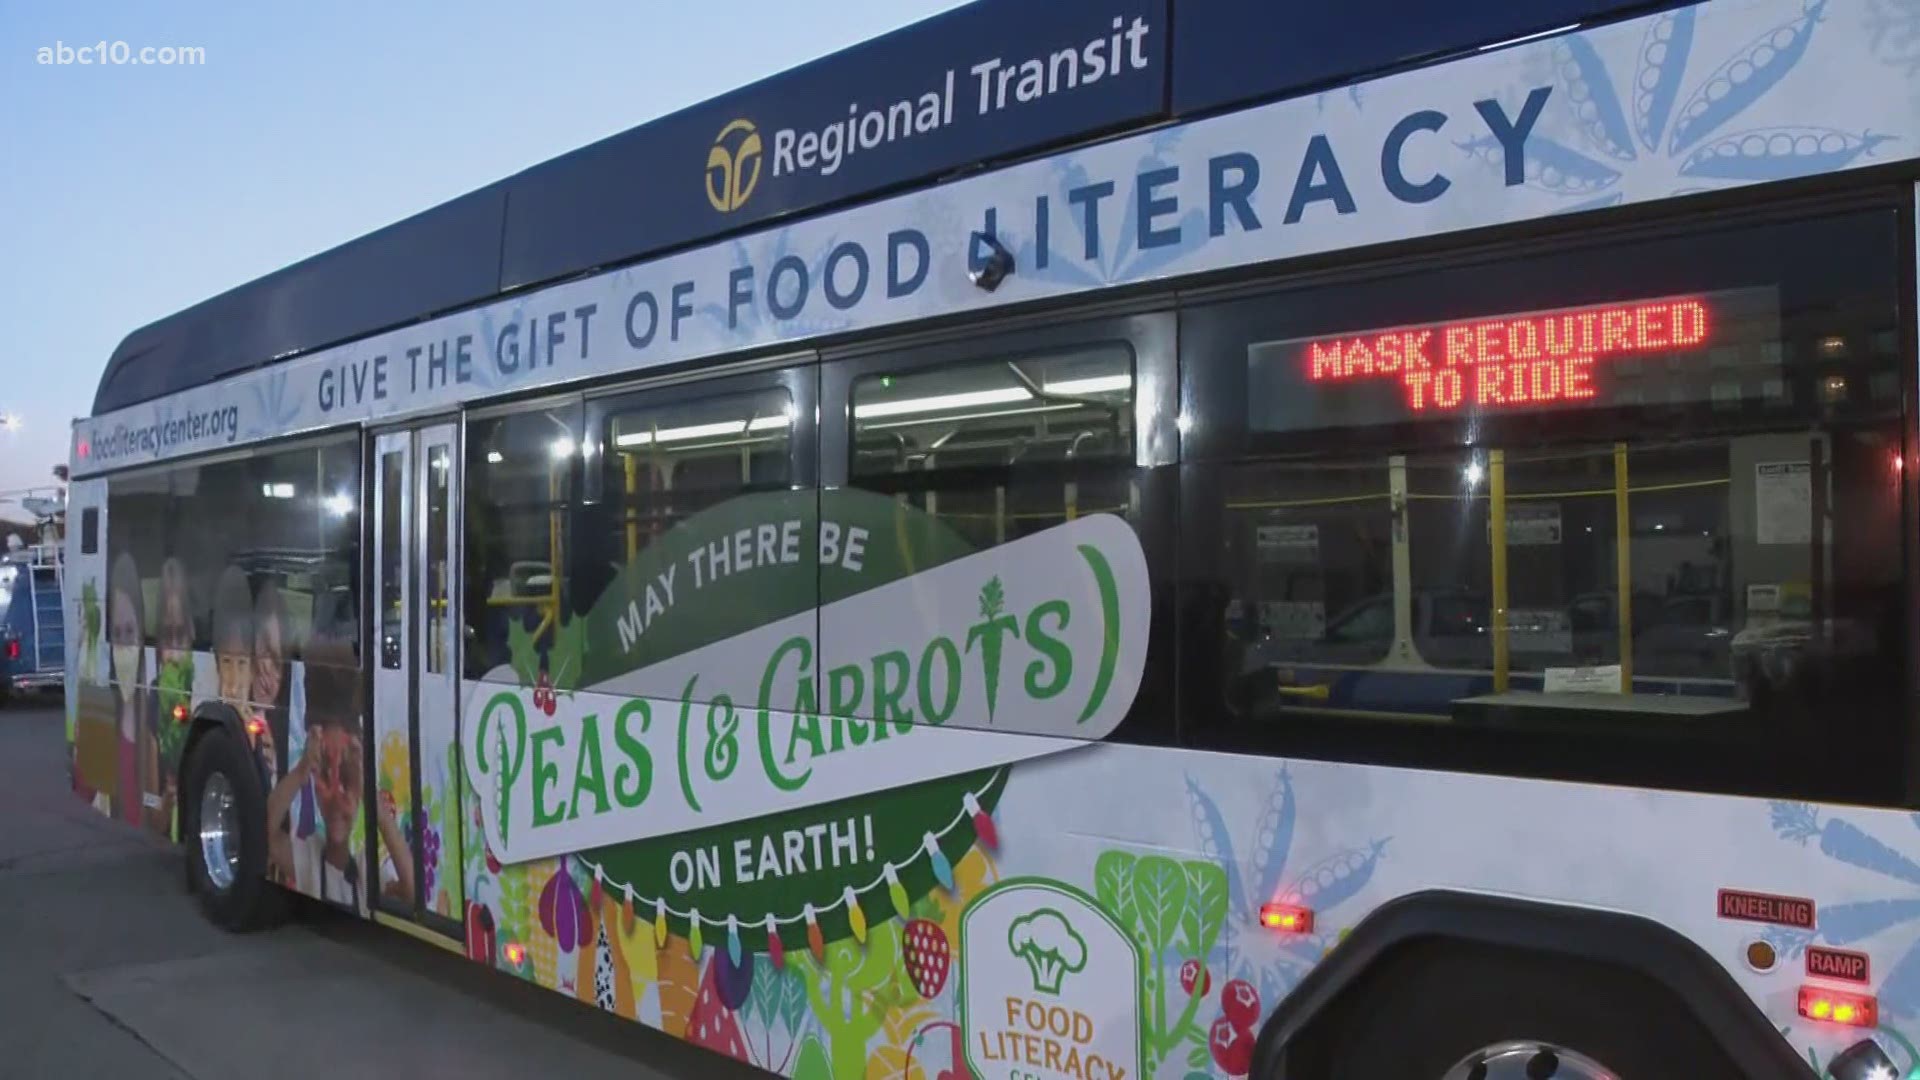 This year, Sac RT's holiday bus is benefiting  the Food Literacy Center in Sacramento.